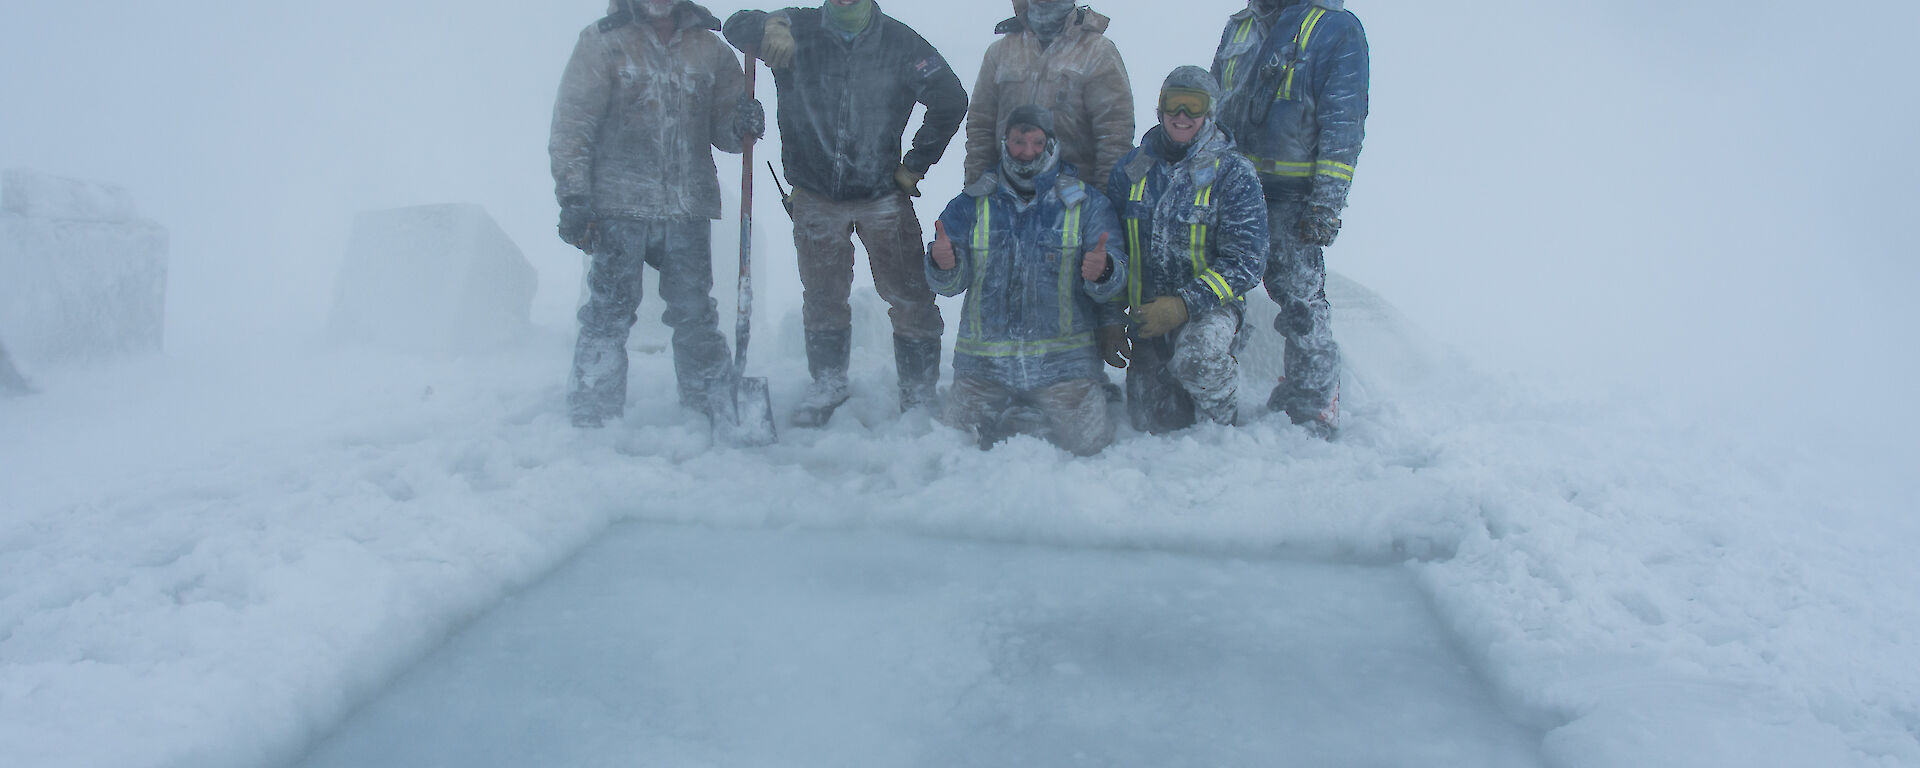 Group of men standing behind a large square hole cut in ice, they are covered in snow and the weather is white-out